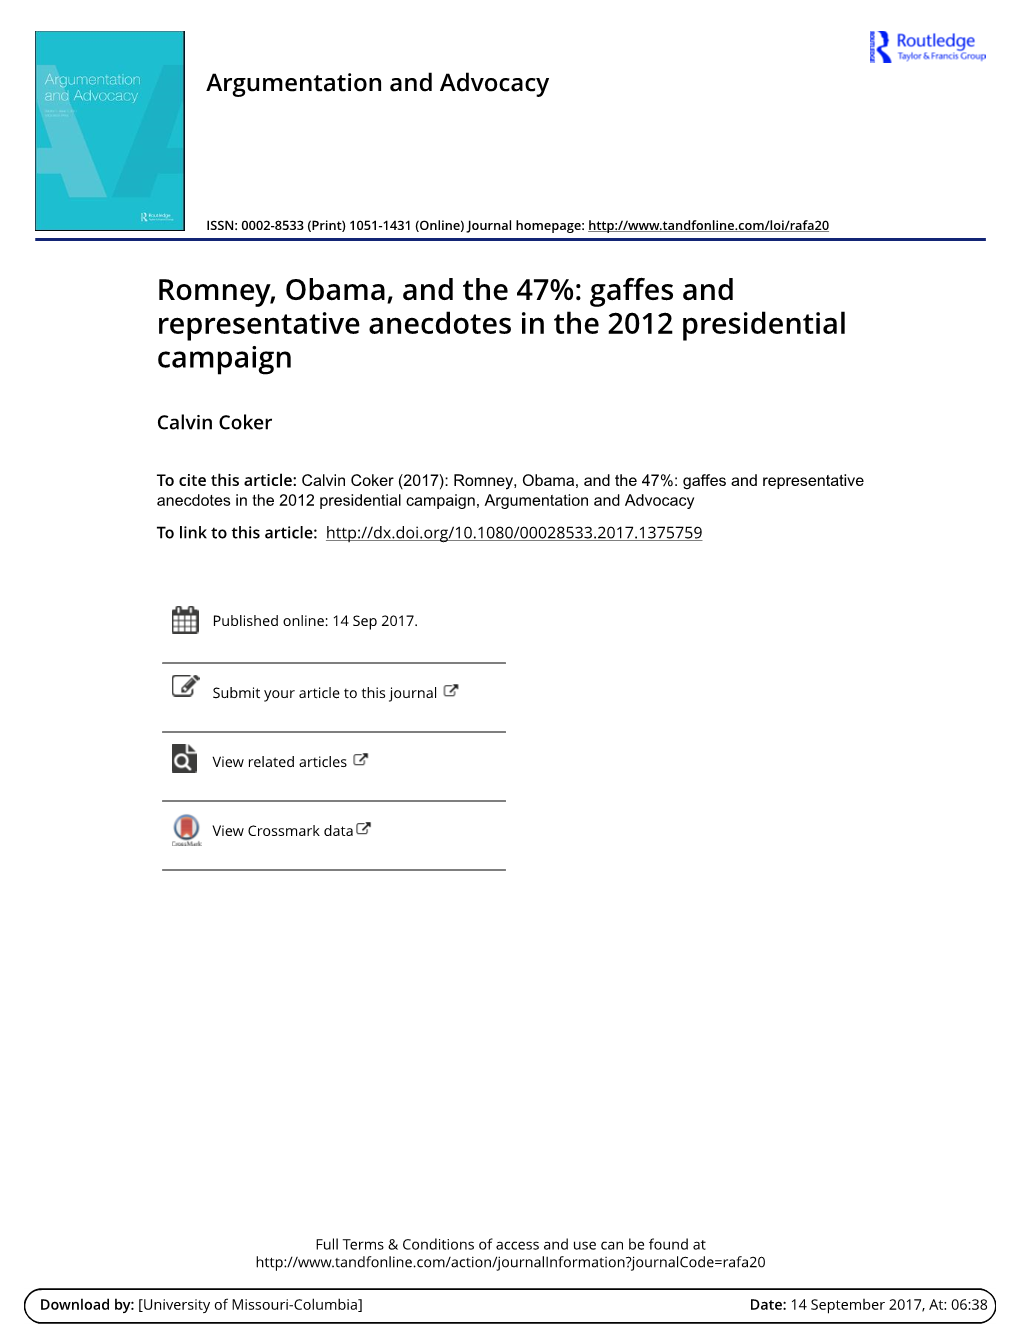 Romney, Obama, and the 47%: Gaffes and Representative Anecdotes in the 2012 Presidential Campaign